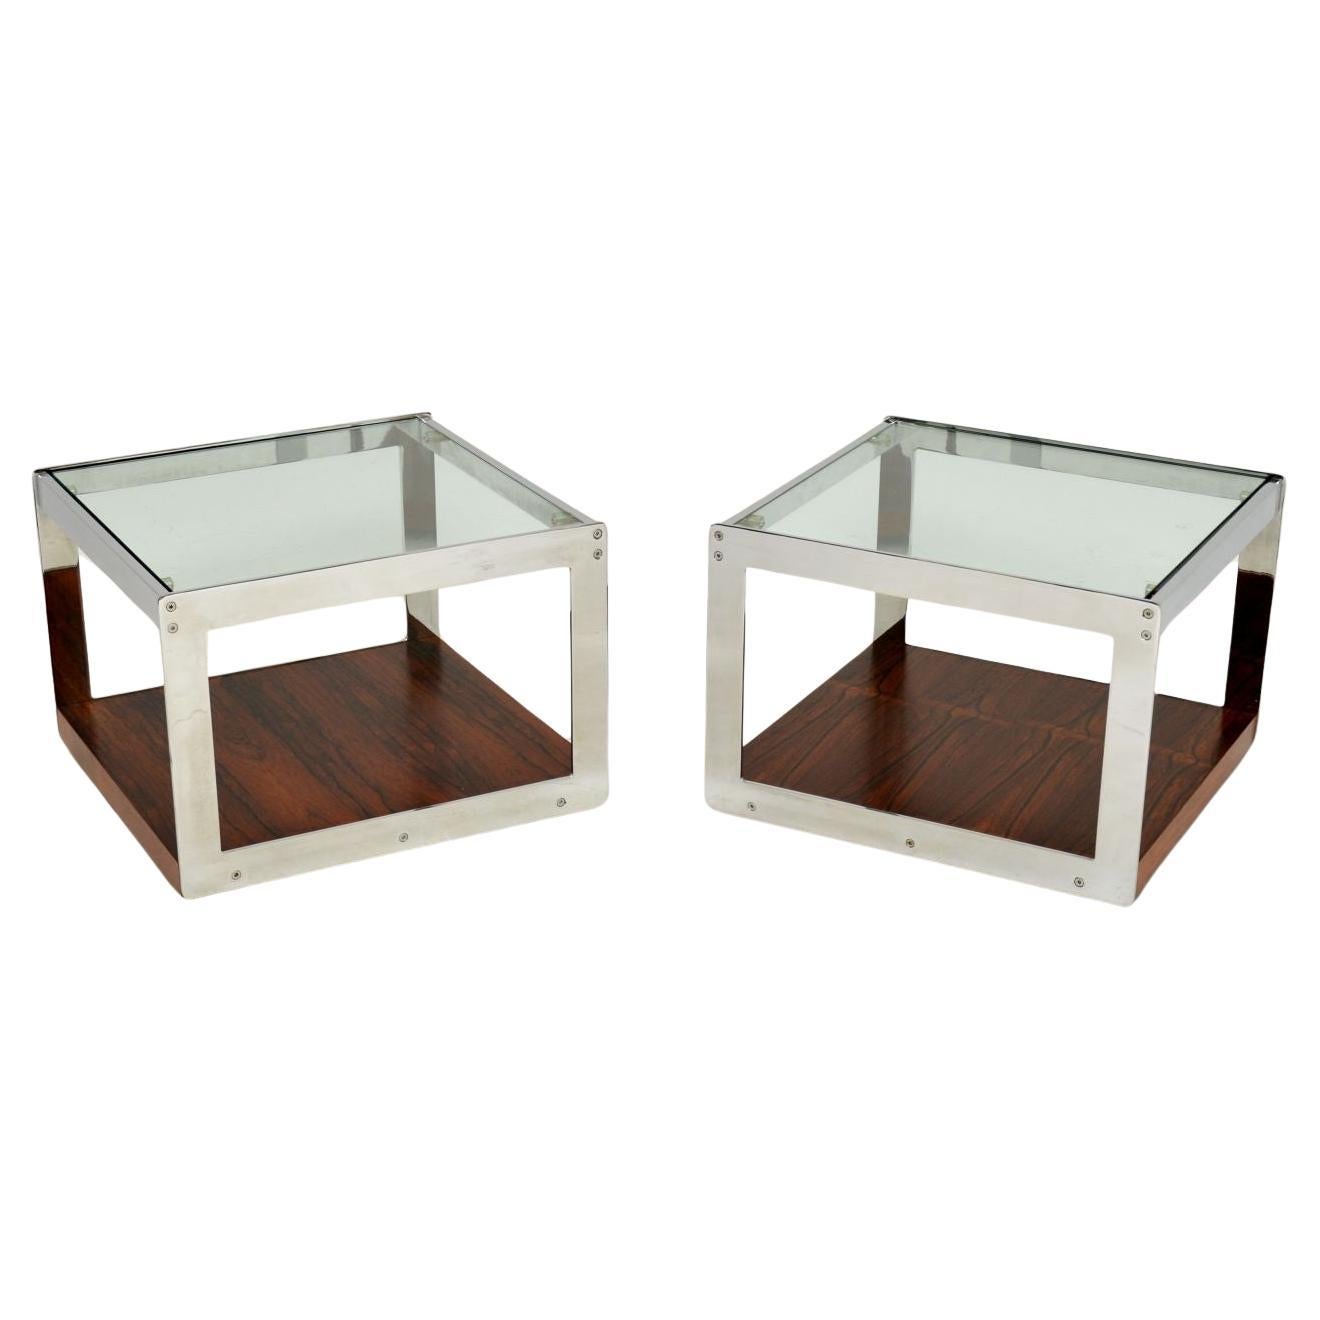 A superb pair of vintage side tables by Merrow Associates. They were designed by Richard Young and made in England in the early 1970’s.

This iconic design is of amazing quality, this pair are a useful and practical size. The wooden bases have